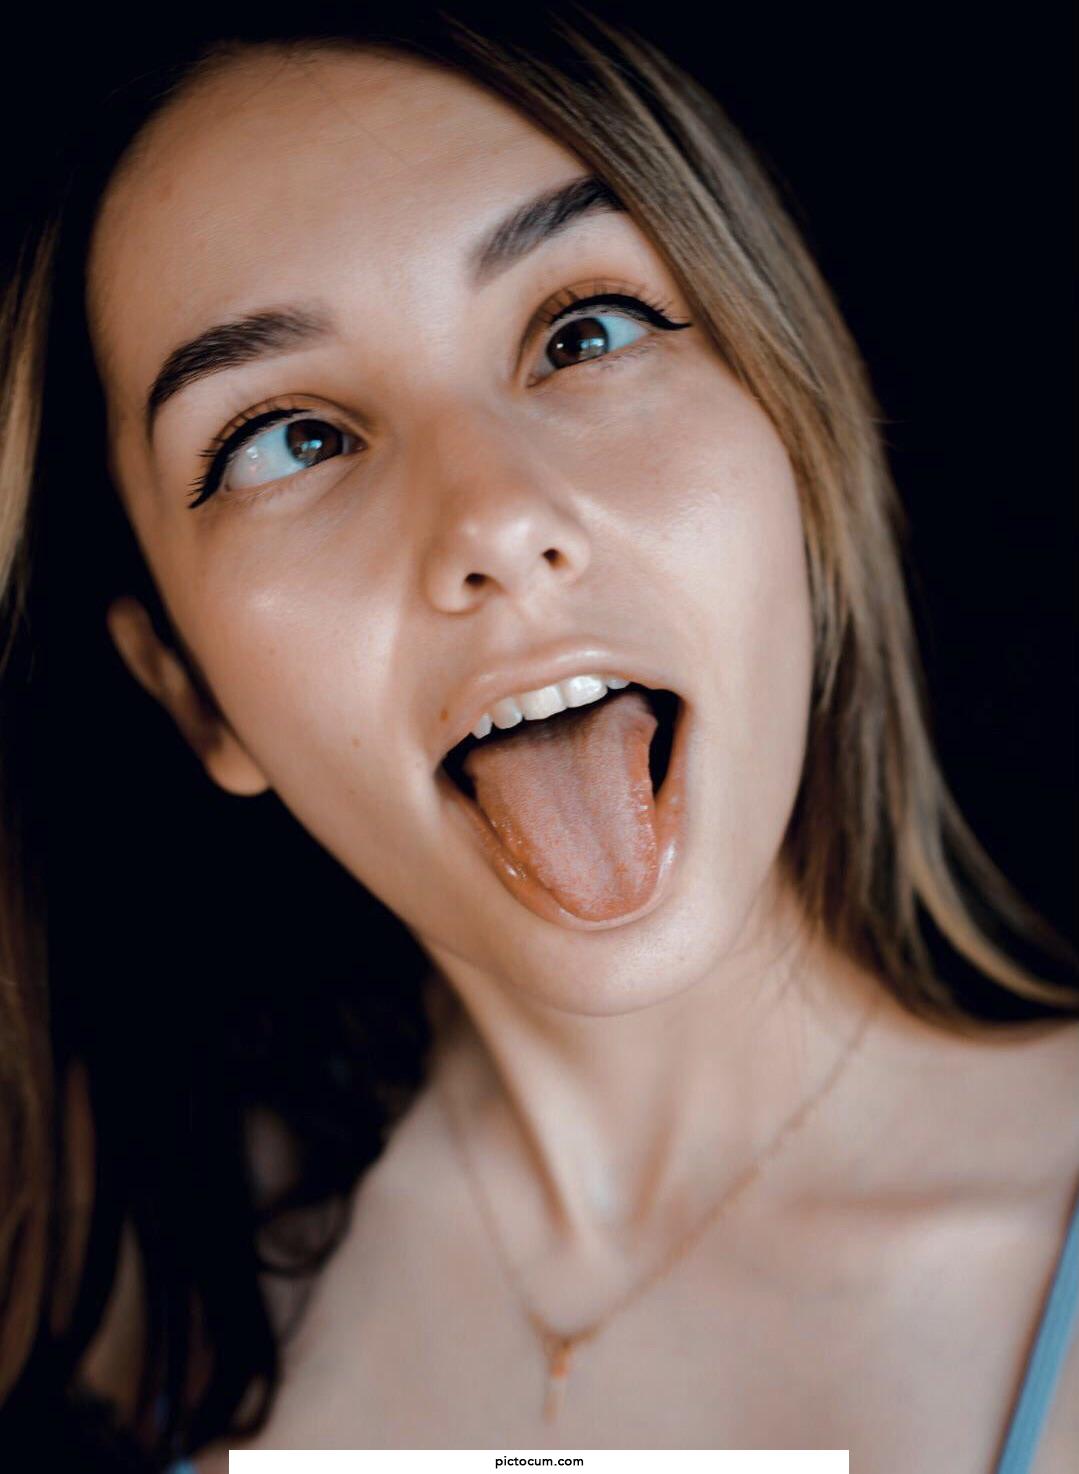 Please cum right on my tongue